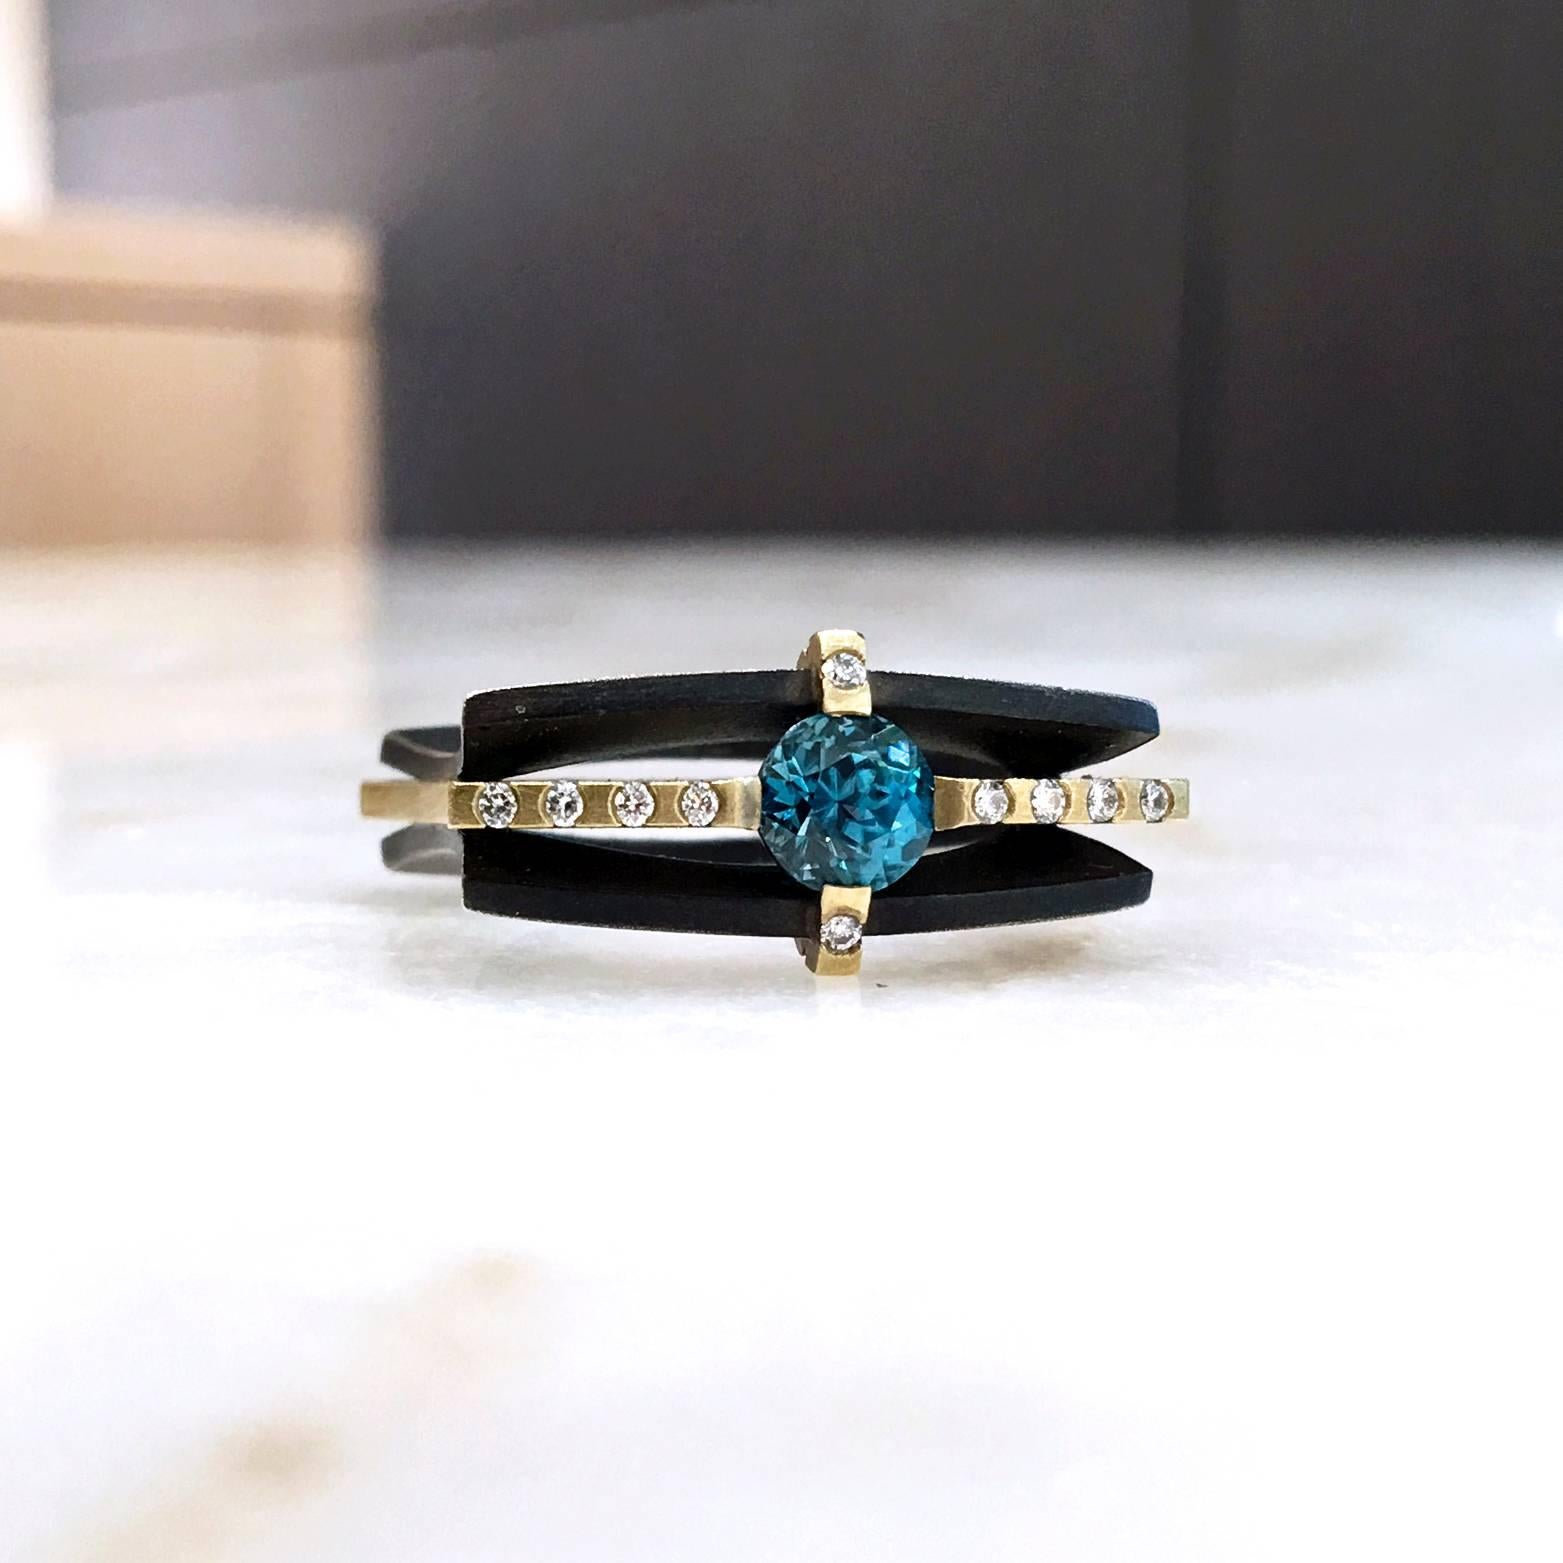 One-of-a-Kind Ring handcrafted by Robin Waynee with two curved and matte finished oxidized sterling silver bands interconnected with a matte finished 18k yellow gold center band. The ring showcases a spectacular 1.18 carat brilliant blue zircon